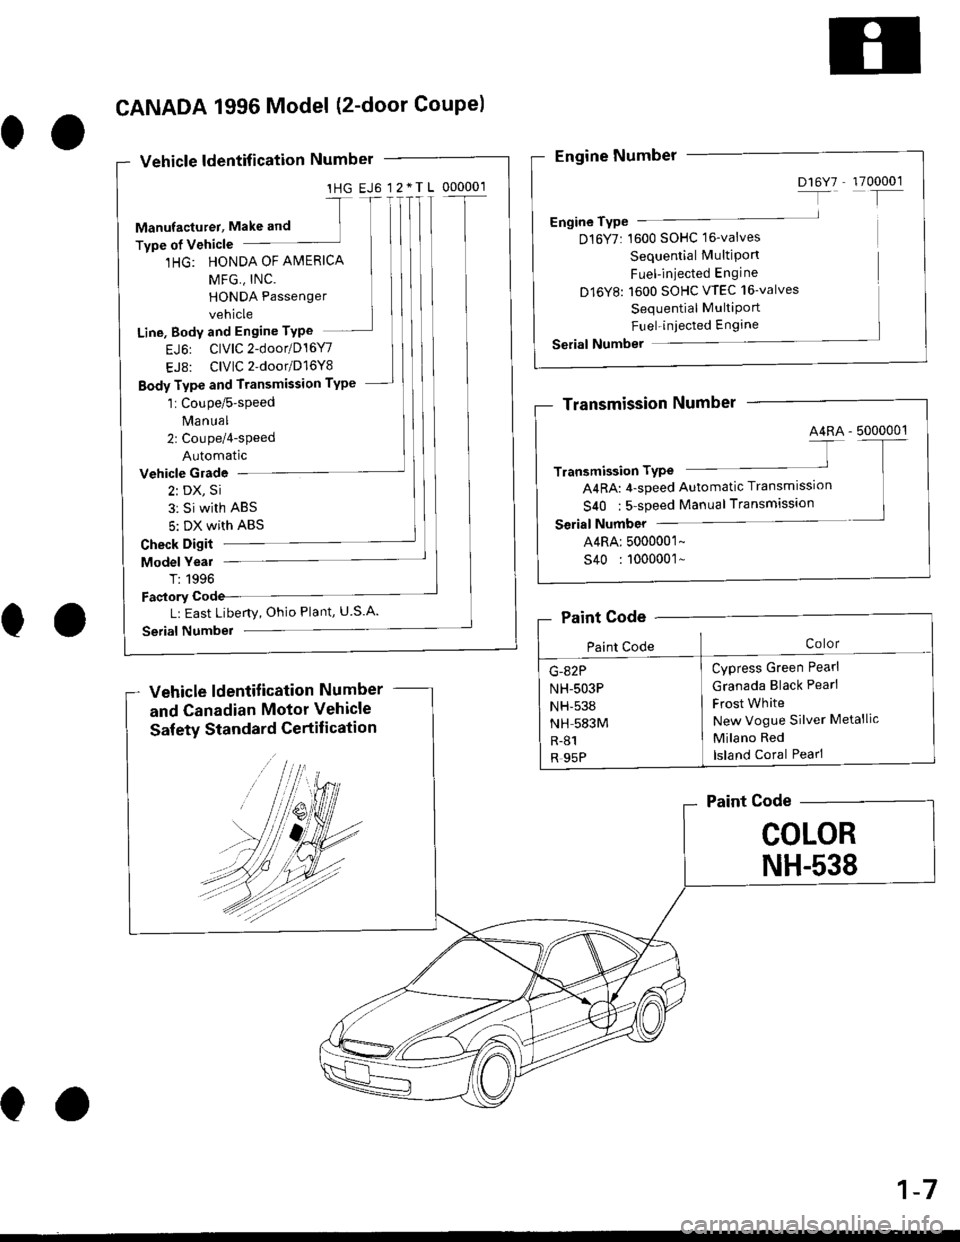 HONDA CIVIC 1998 6.G Workshop Manual 1HG EJ6 12.TL 000001
Line, Body and Engine TYPe
EJ6: ClVlC2-door/D16Y7
EJ8: ClVlC2door/D16Y8
Body Type and Transmission TYPe
Vehicle Glade
2: DX, Si
3: Si with ABS
5: DX with ABS
Check Digit
Model Ye